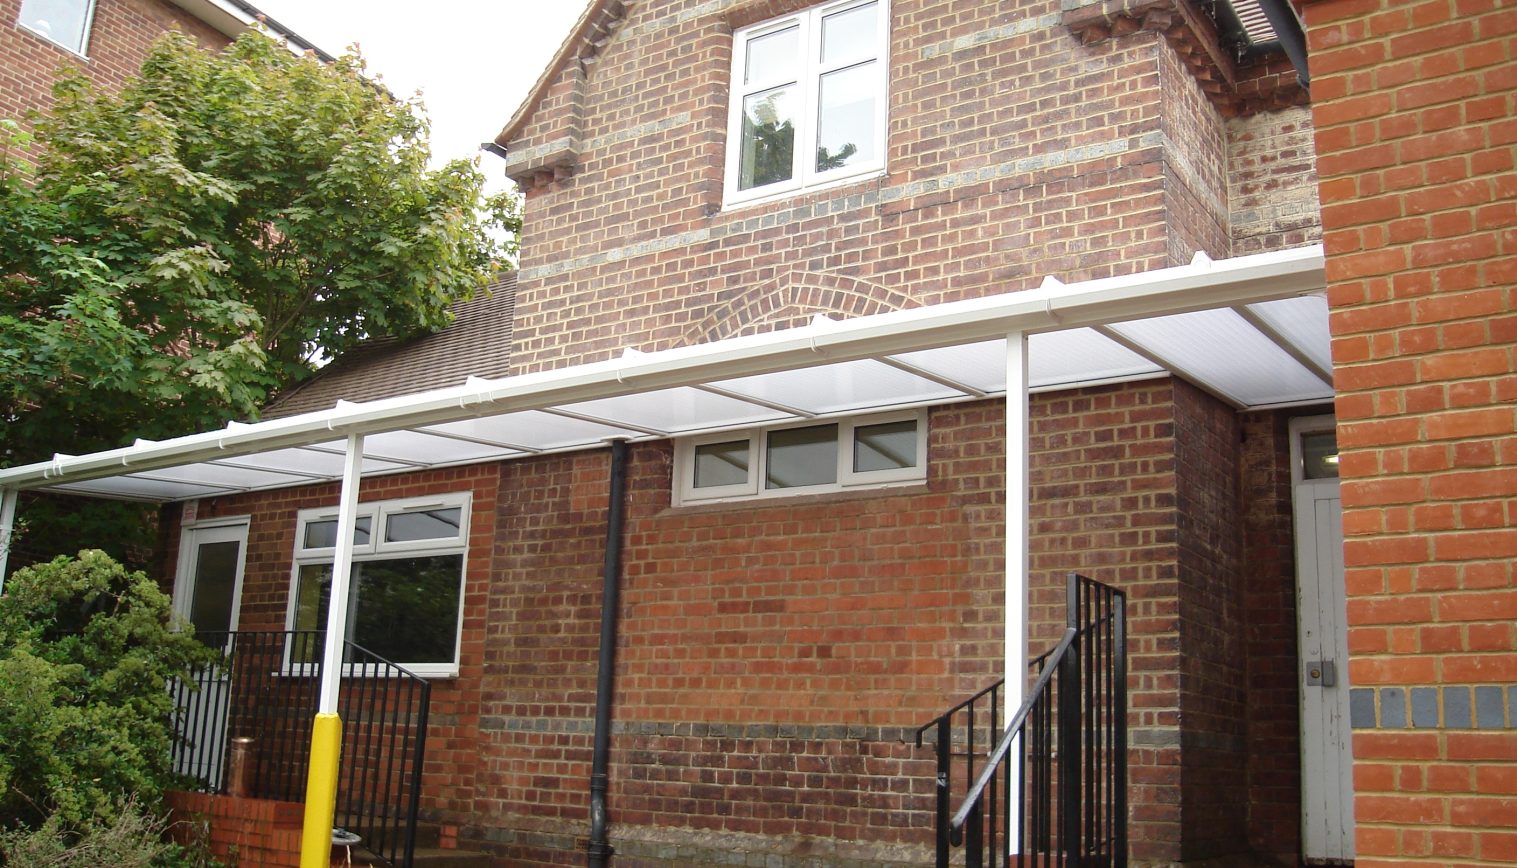 New Christchurch C of E Primary School – Wall Mounted Canopy